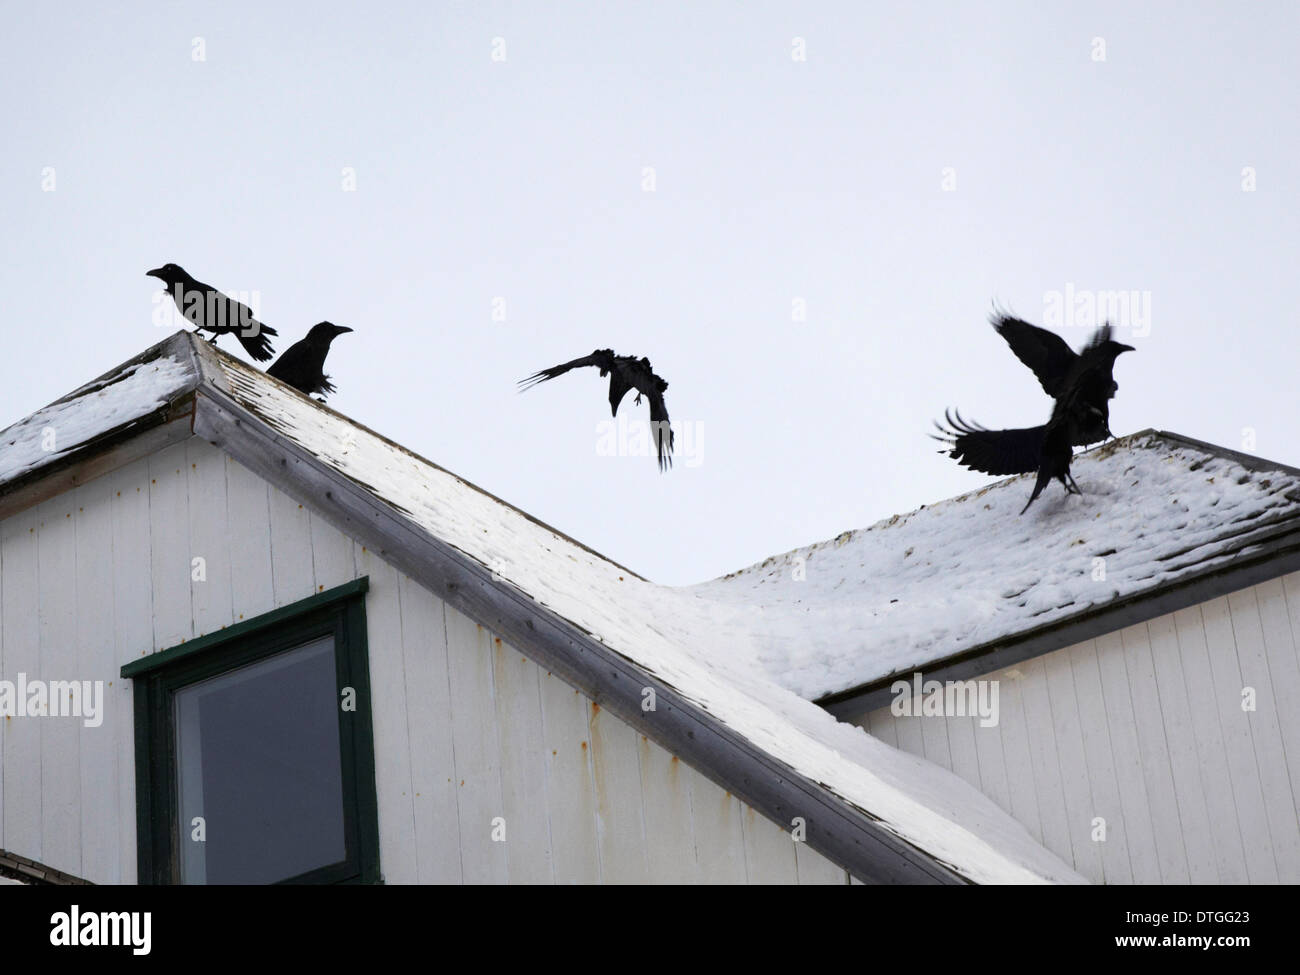 Ravens at a roof in Nuuk, The capital of Greenland. Stock Photo